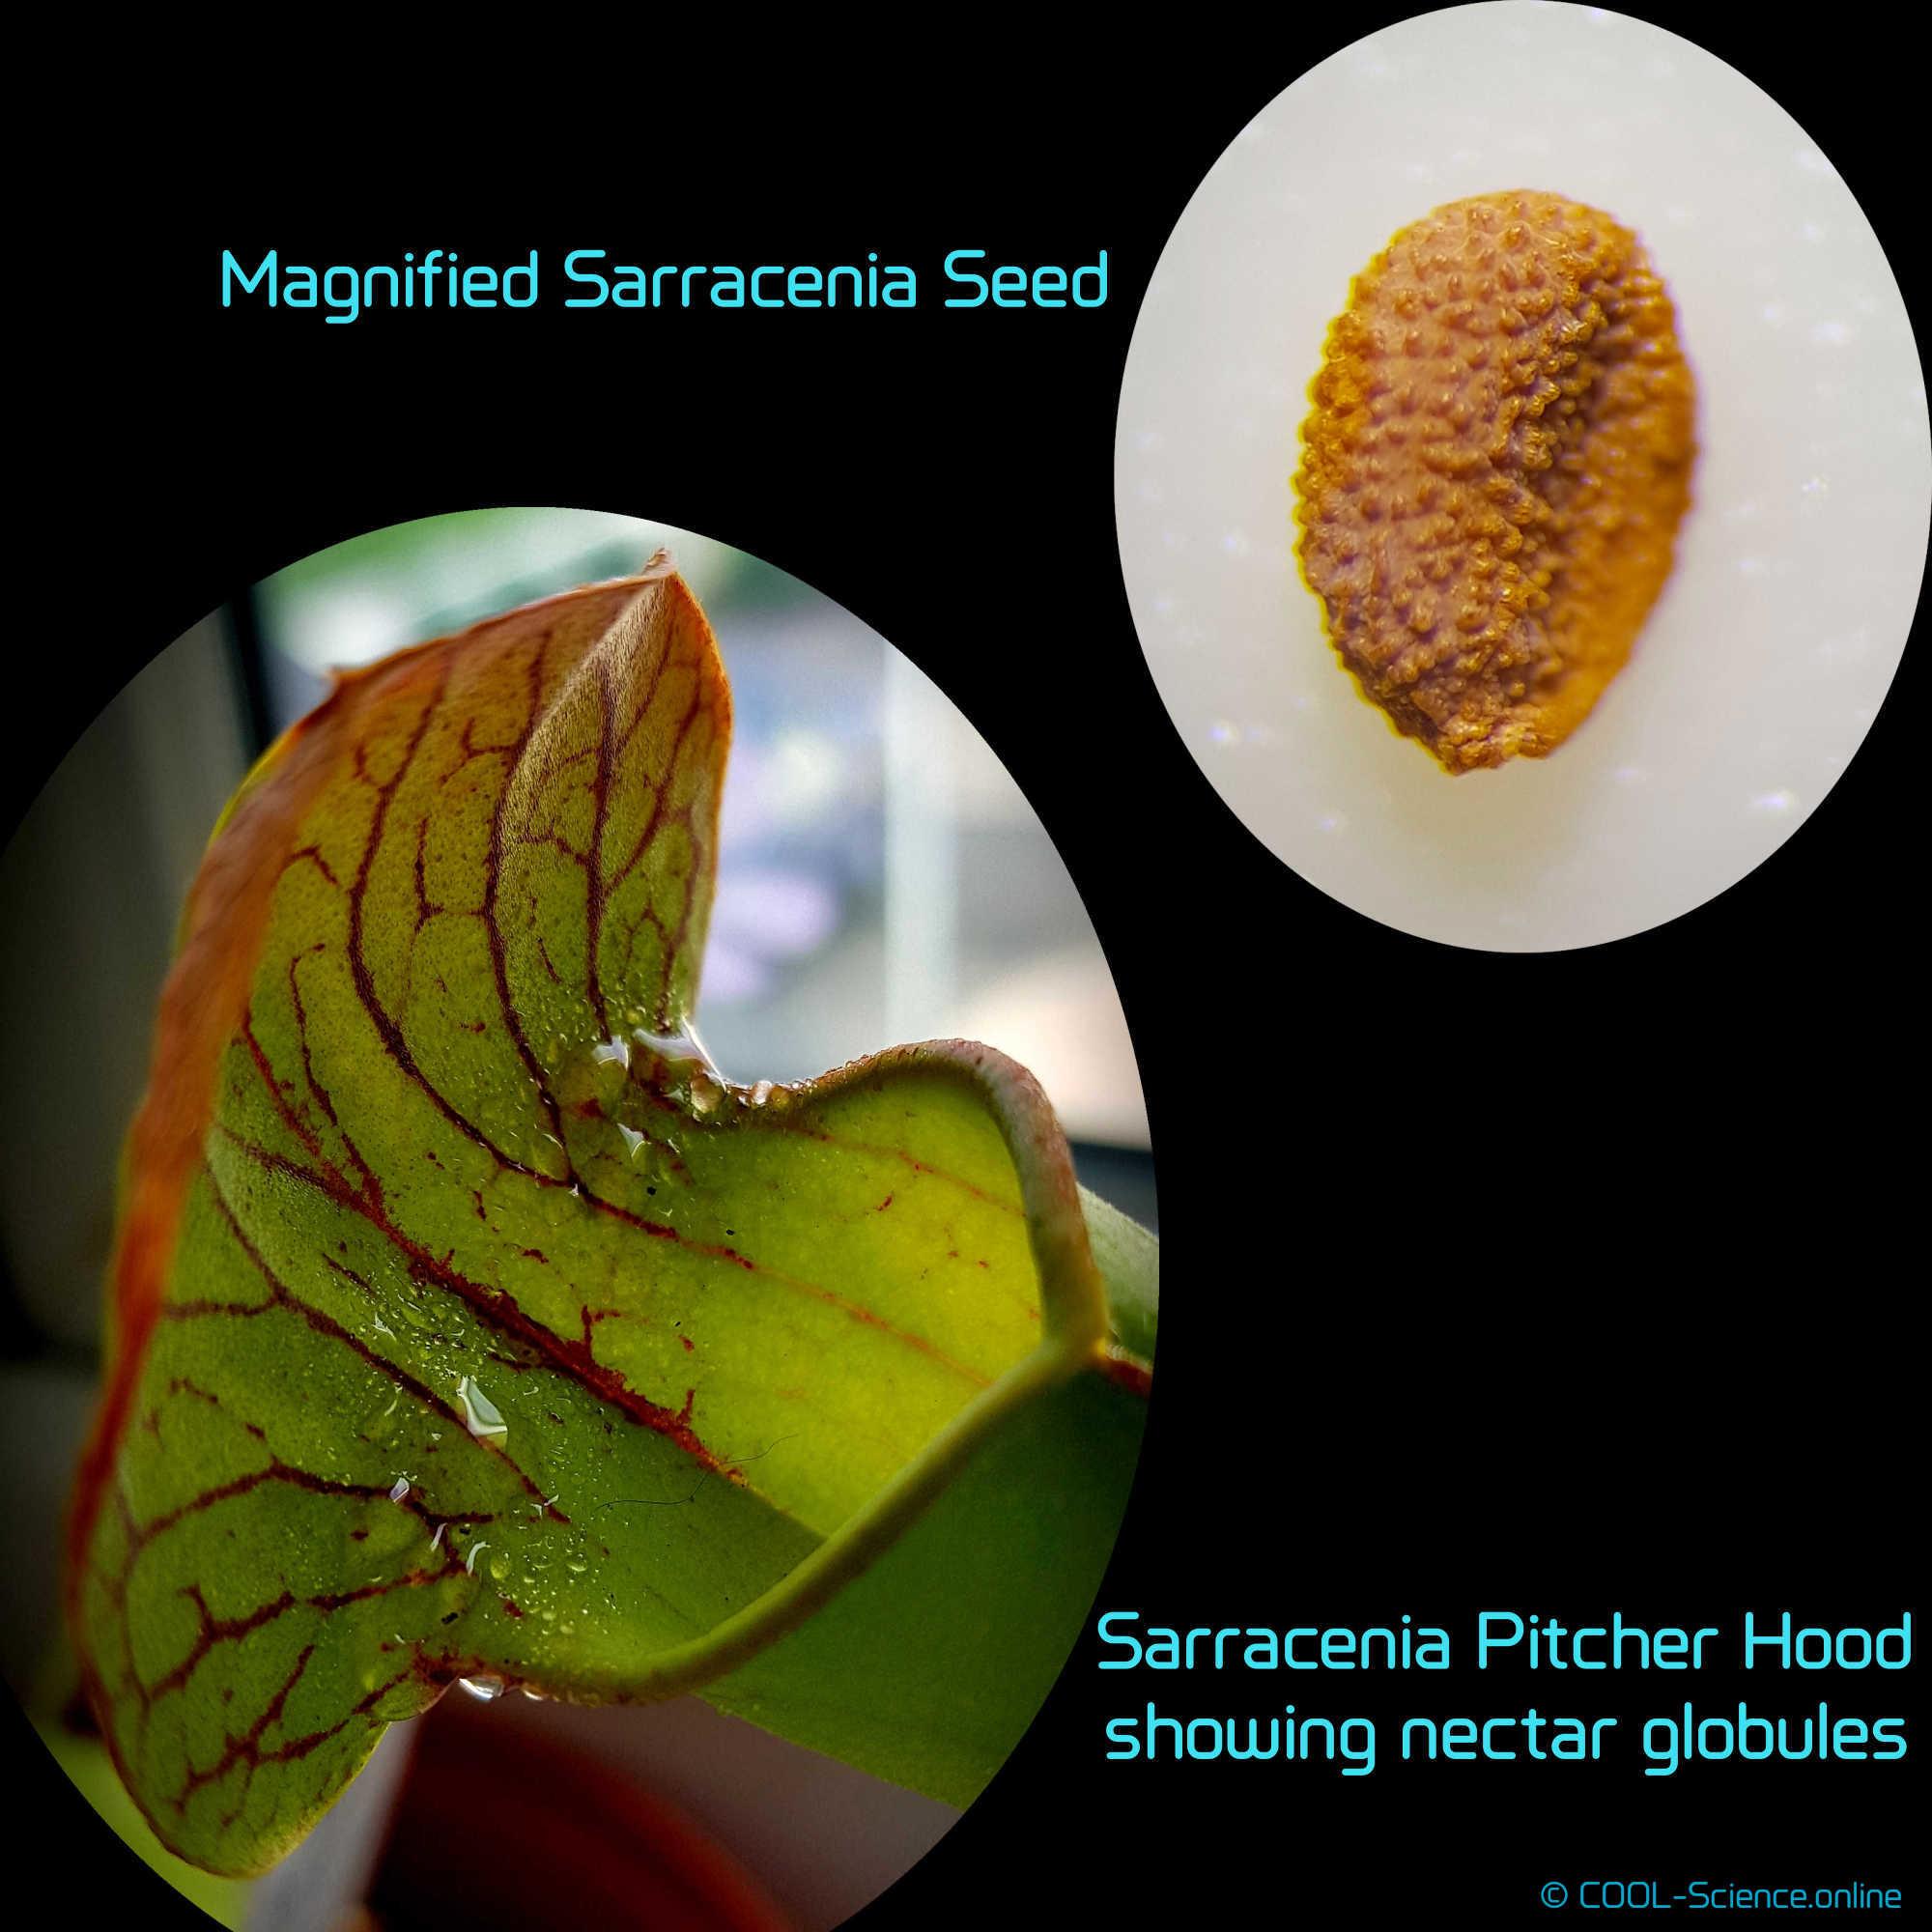 Sarracenia Seed and Pitcher hood showing nectar globules